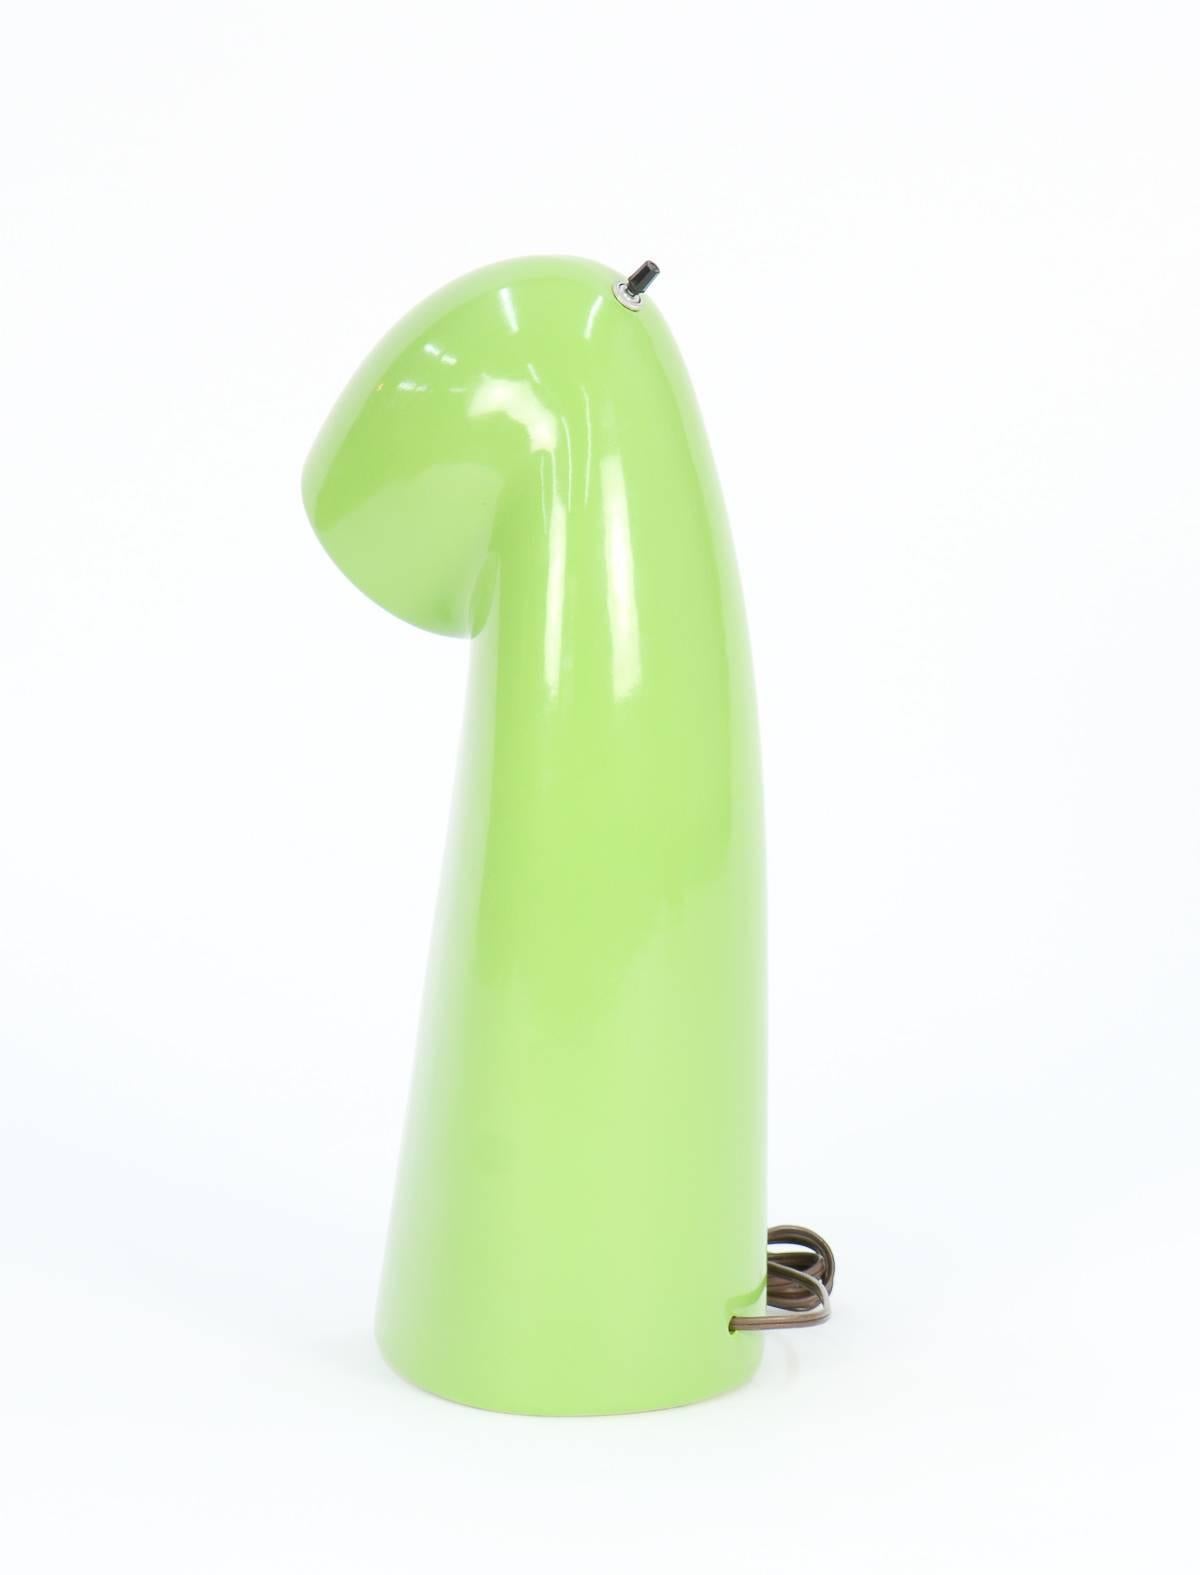 A playful green Space Age ceramic desk lamp. In a fab and rare mint green color.